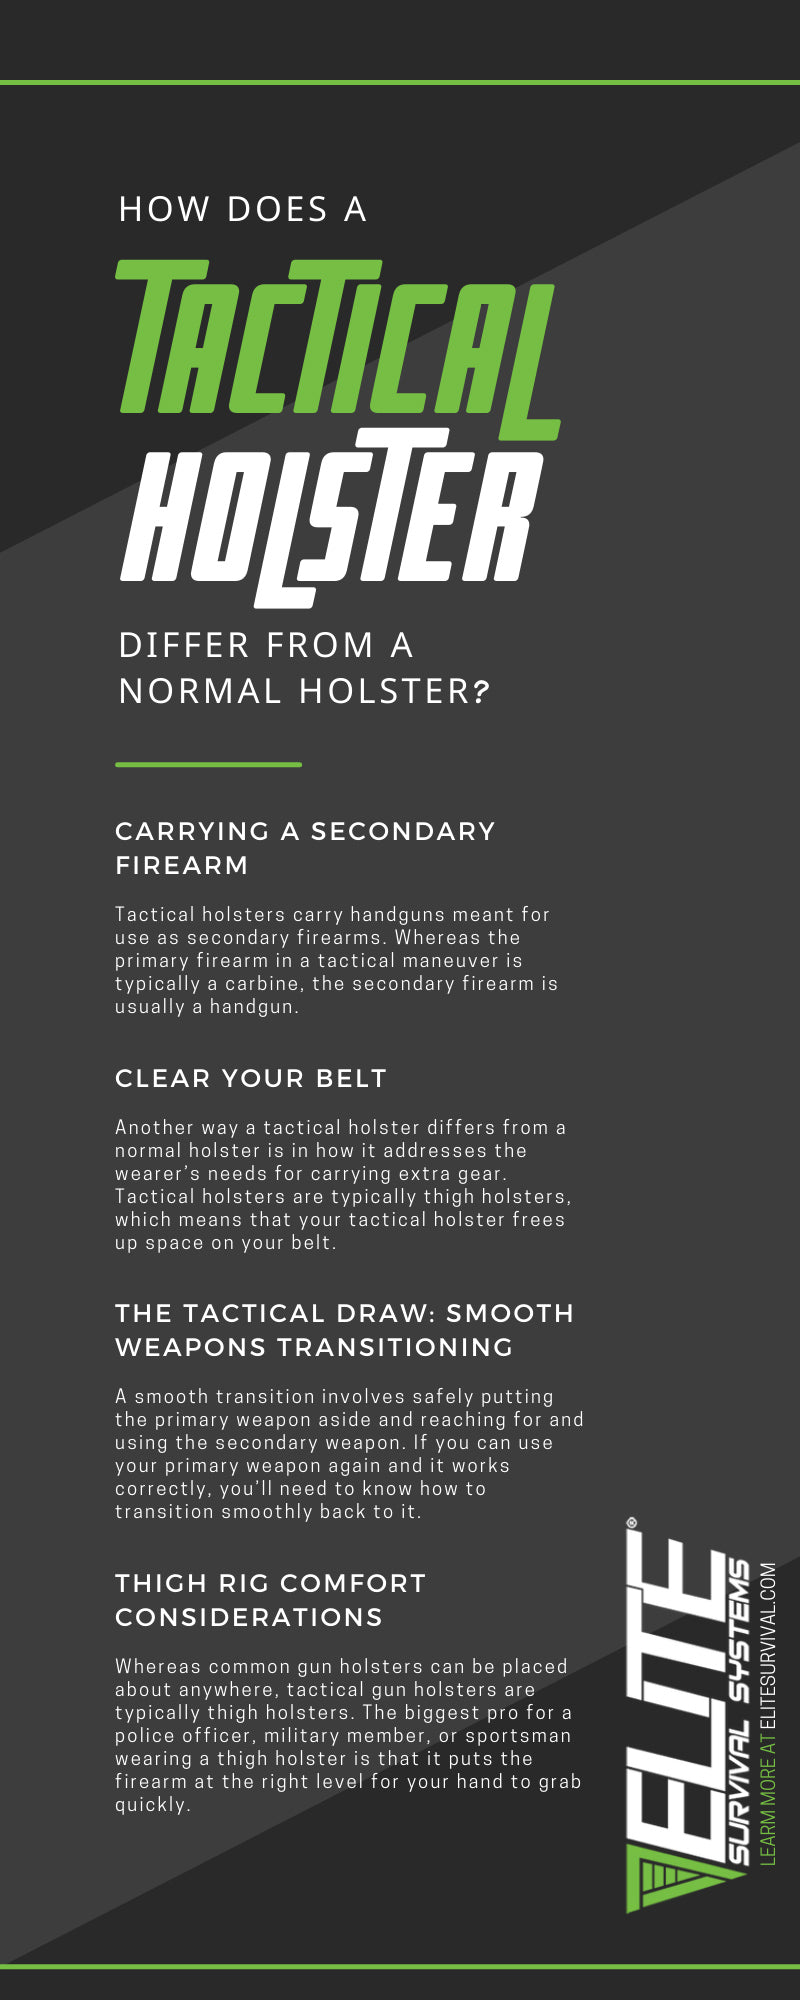 How Does a Tactical Holster Differ From a Normal Holster?